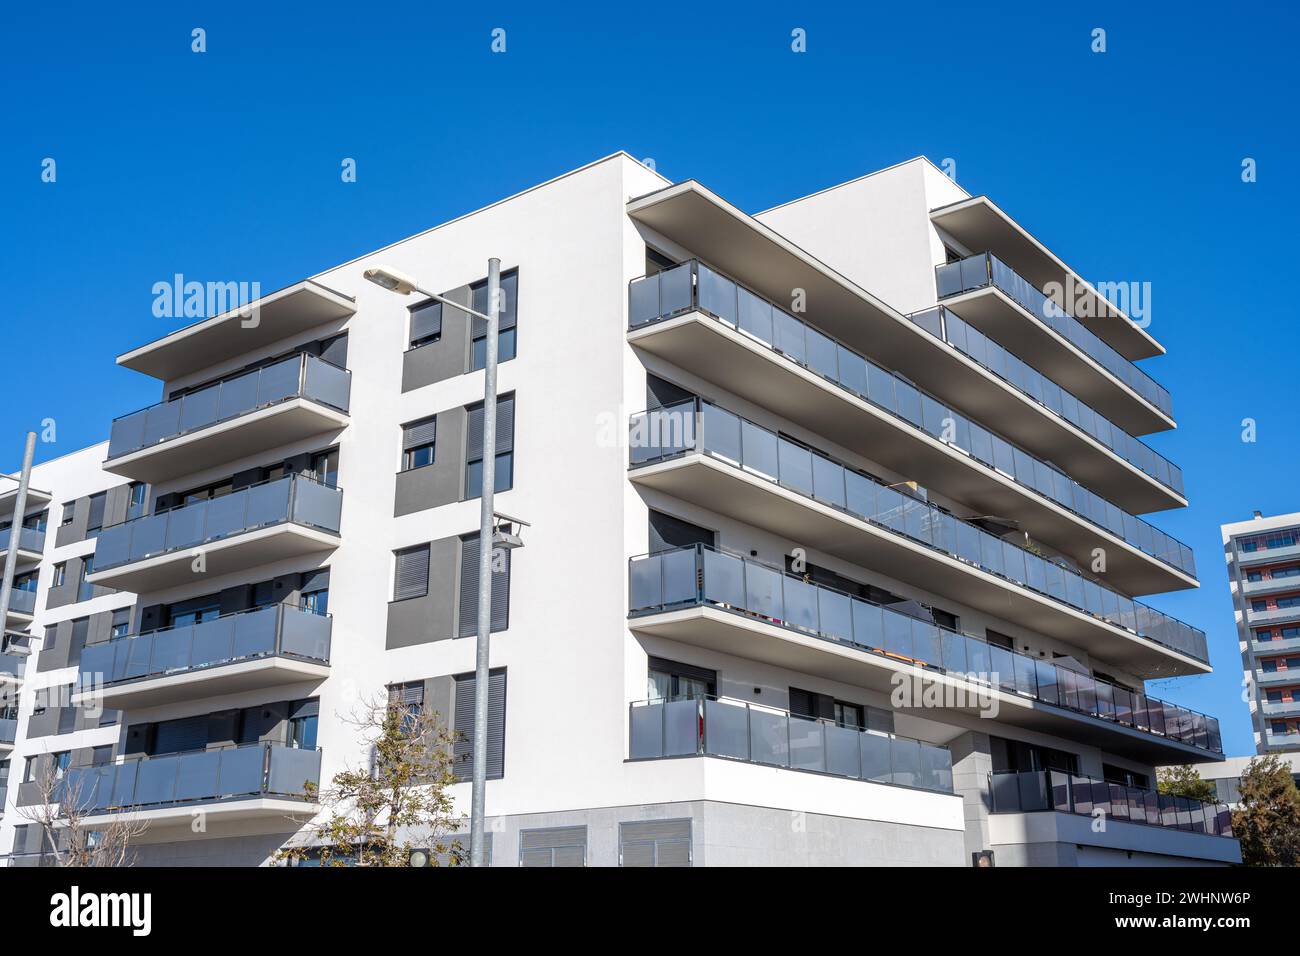 Modern white apartment building with balconies seen in Barcelona, Spain Stock Photo